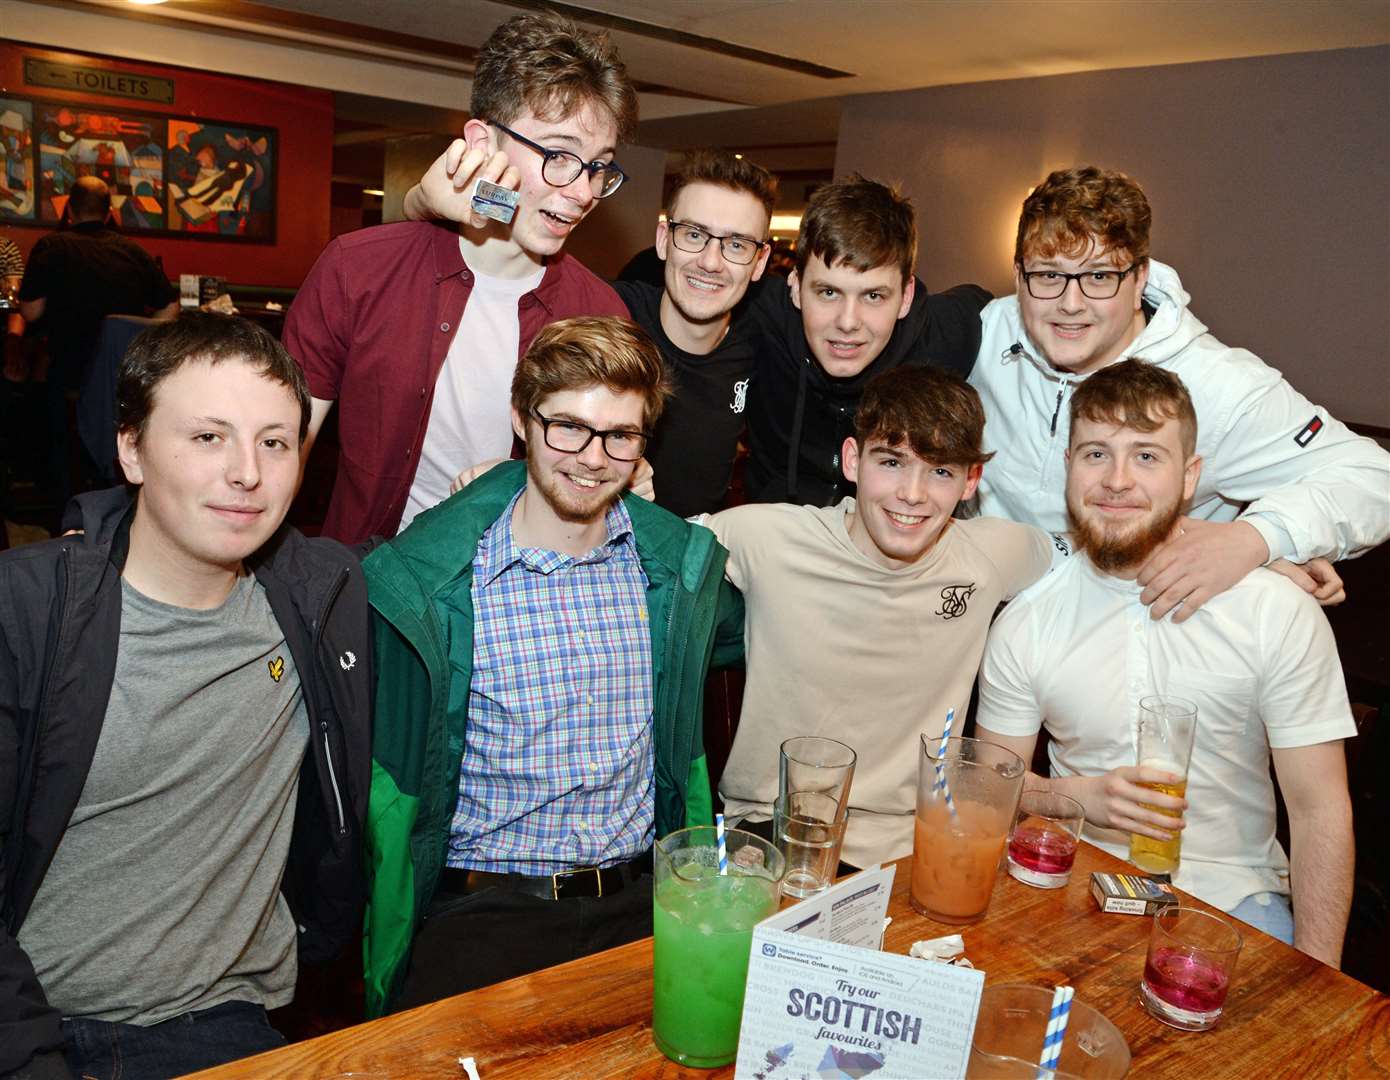 CITY SEEN 03 11 18..Inverness lads night out...CITY SEEN 03 11 18..Picture: Gair Fraser. Image No. 042427..